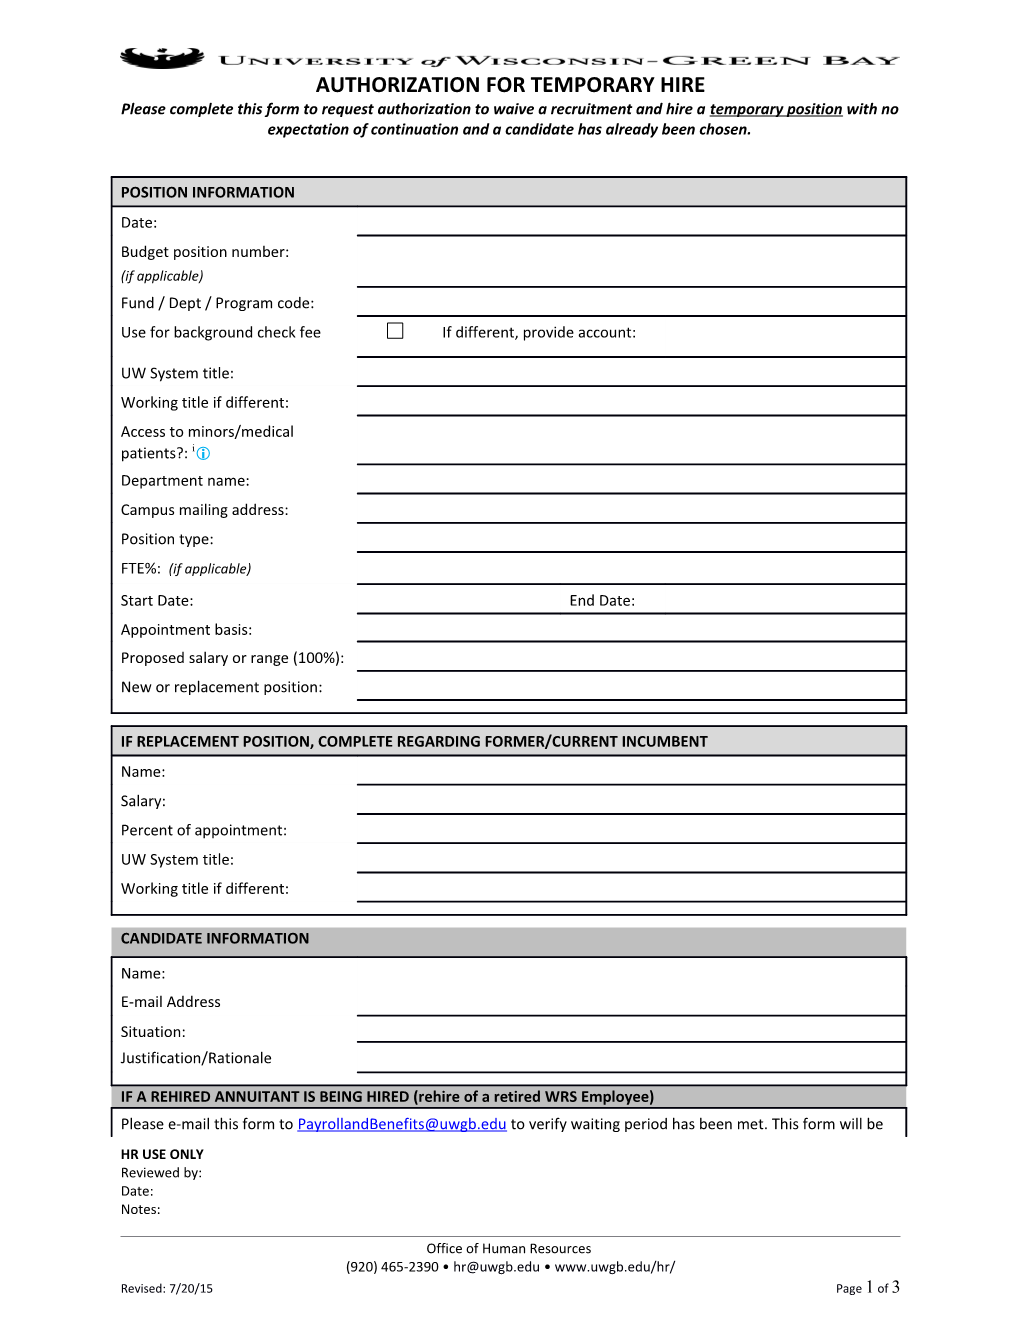 AUTHORIZATION for TEMPORARY HIRE Please Complete This Form to Request Authorization To